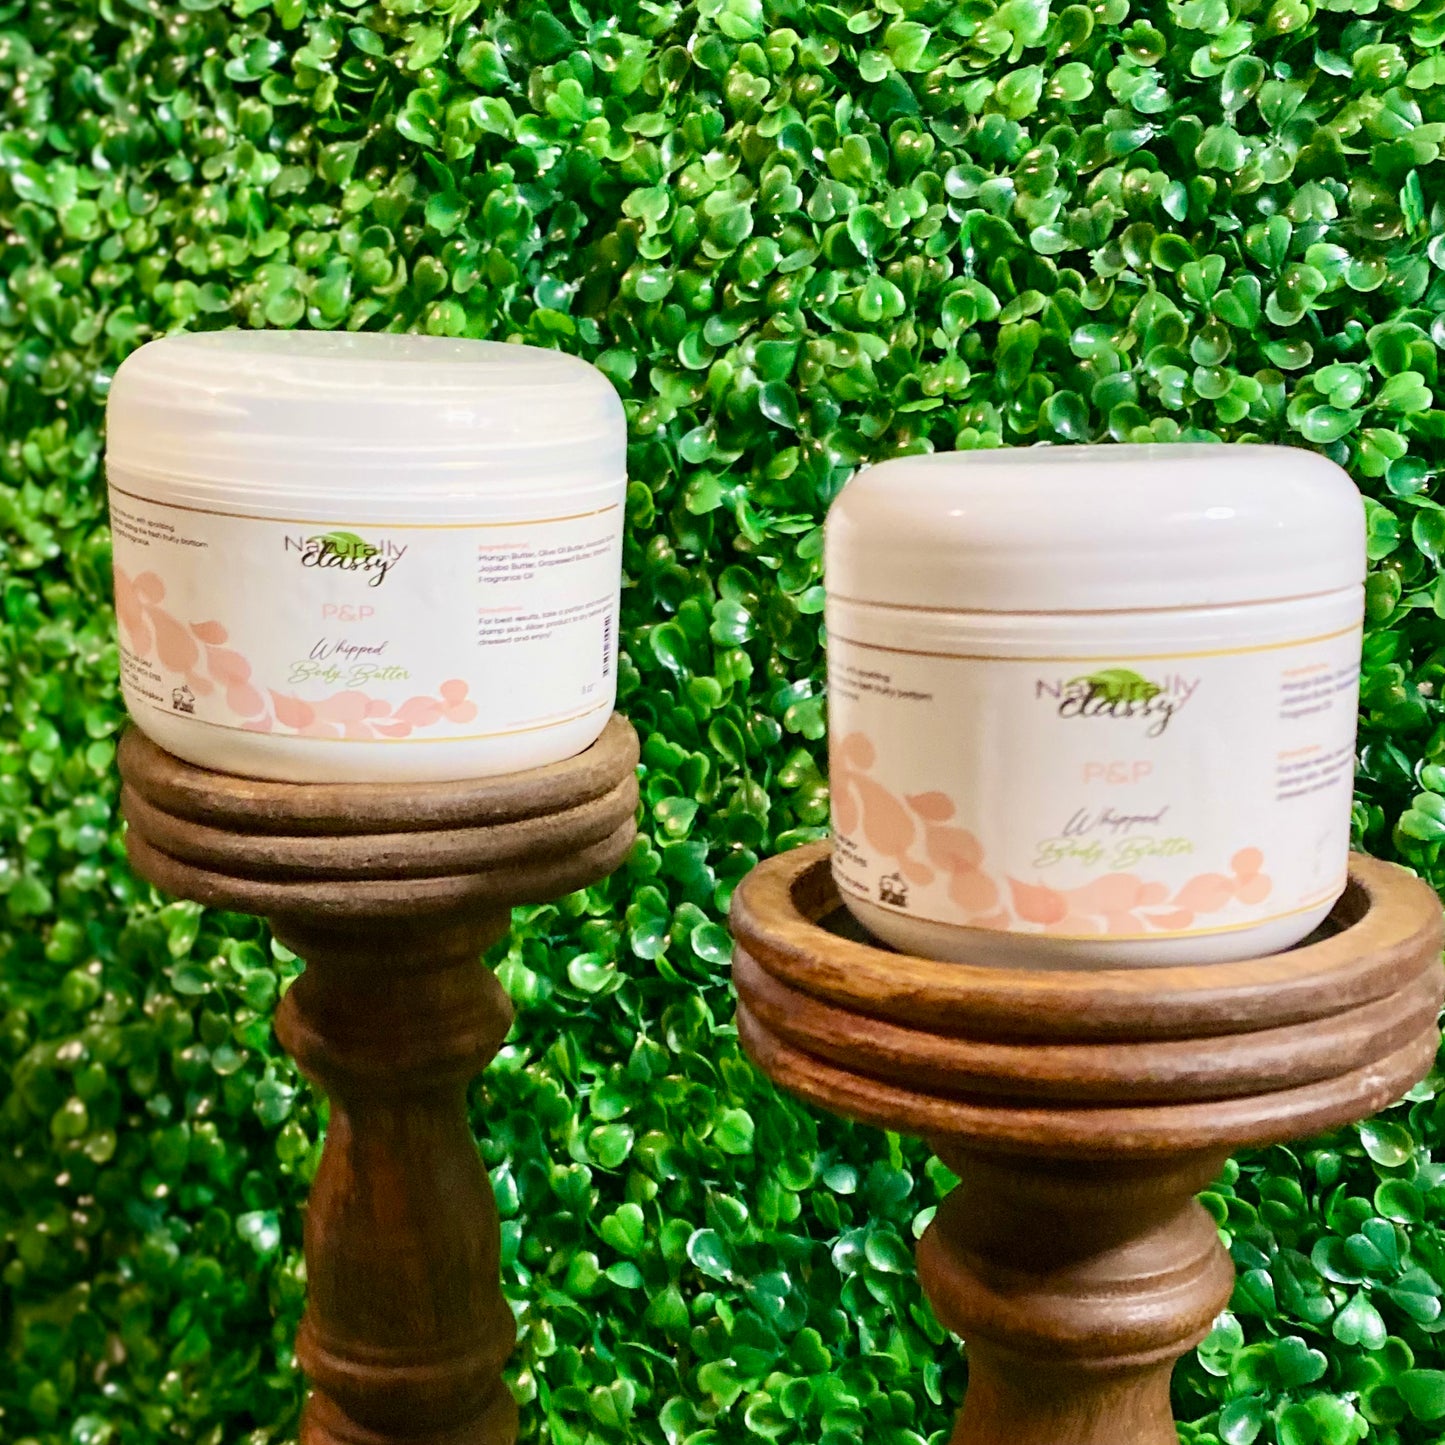 P & P Whipped Body Butter